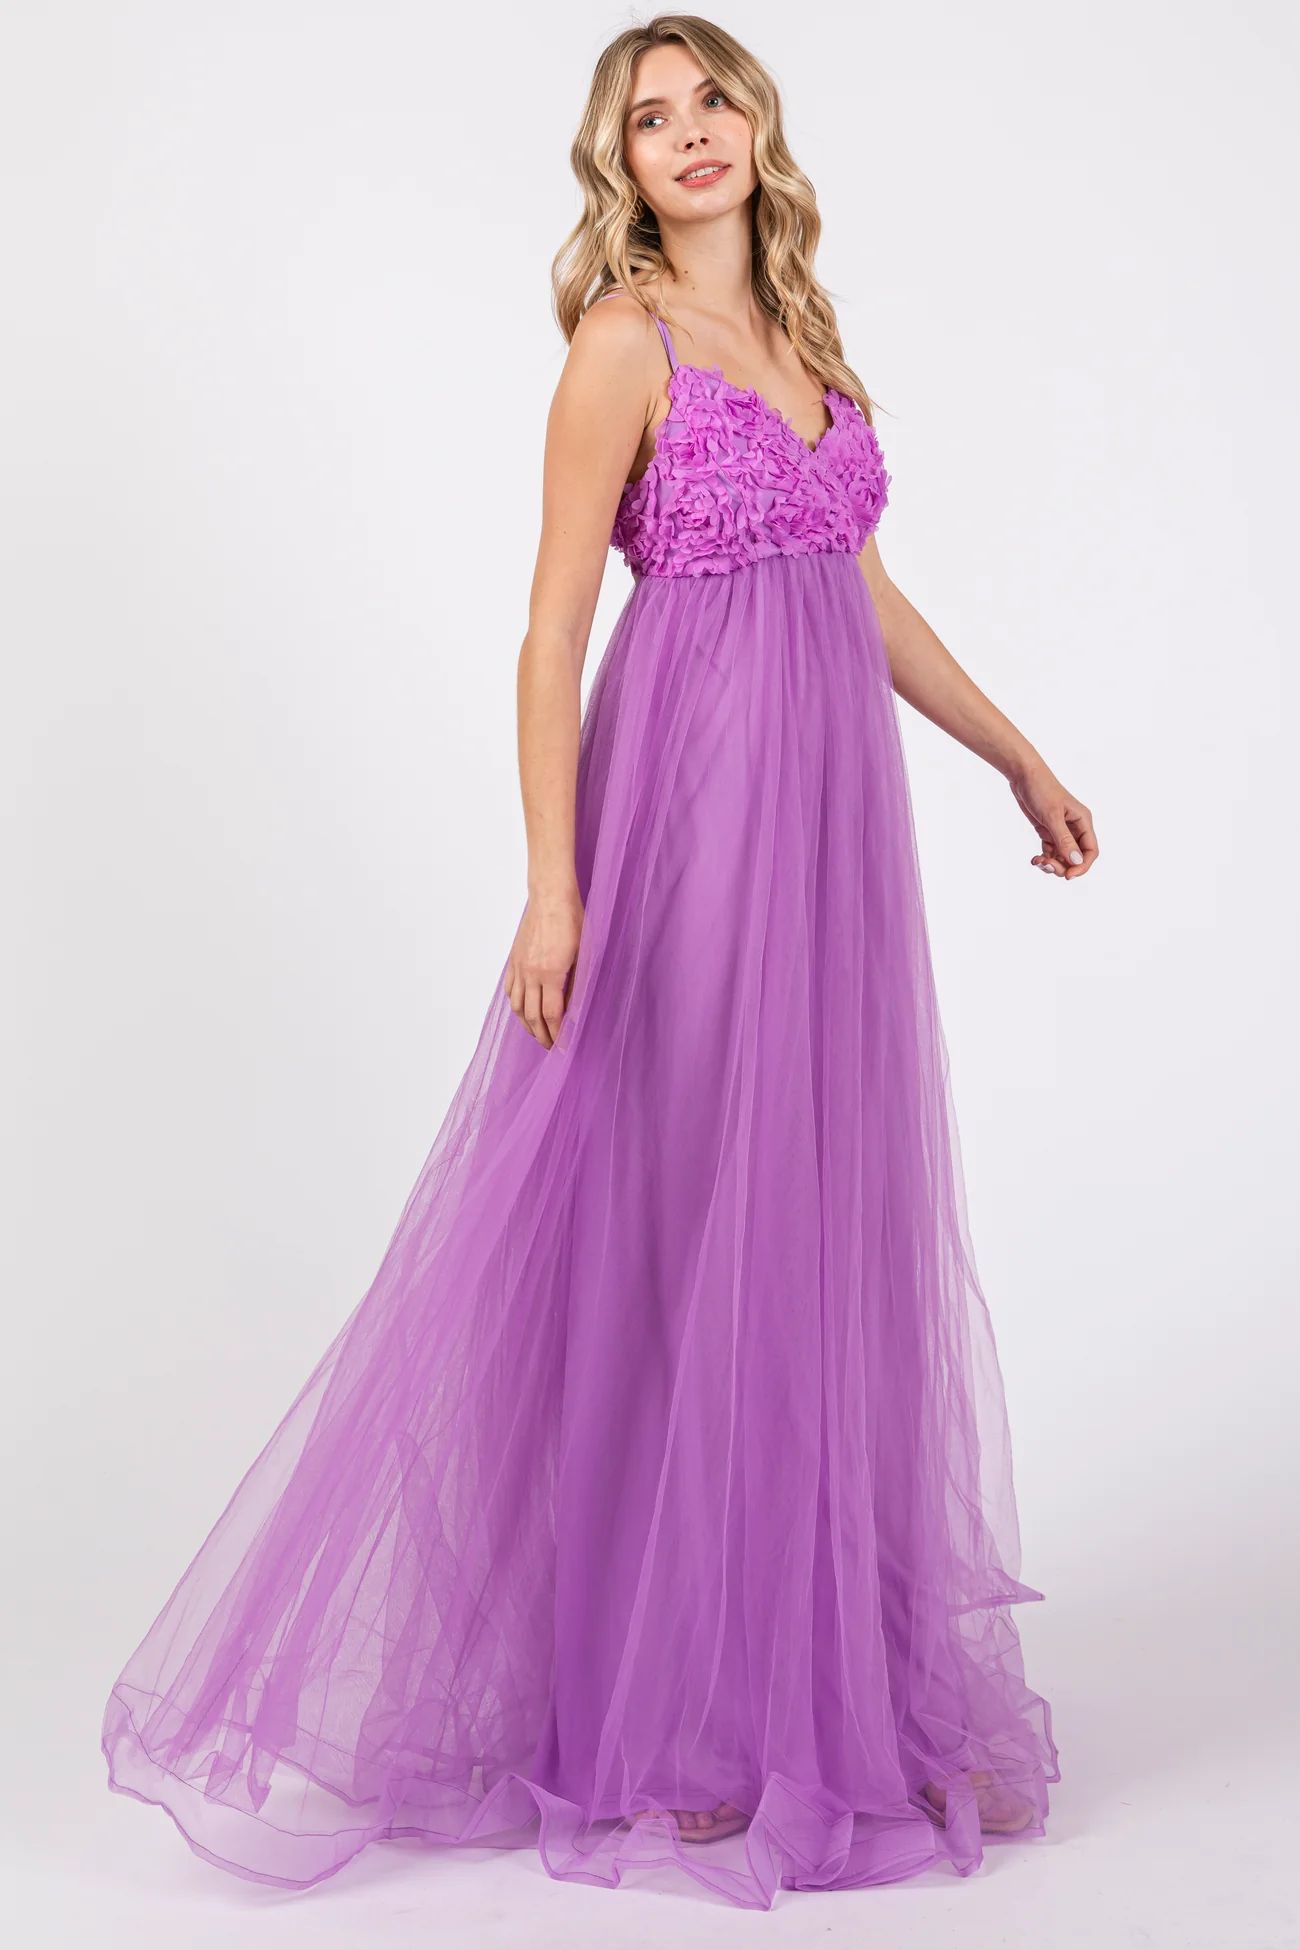 Purple Floral Applique Lace-Up Back Tulle Maternity Maxi Dress | PinkBlush Maternity